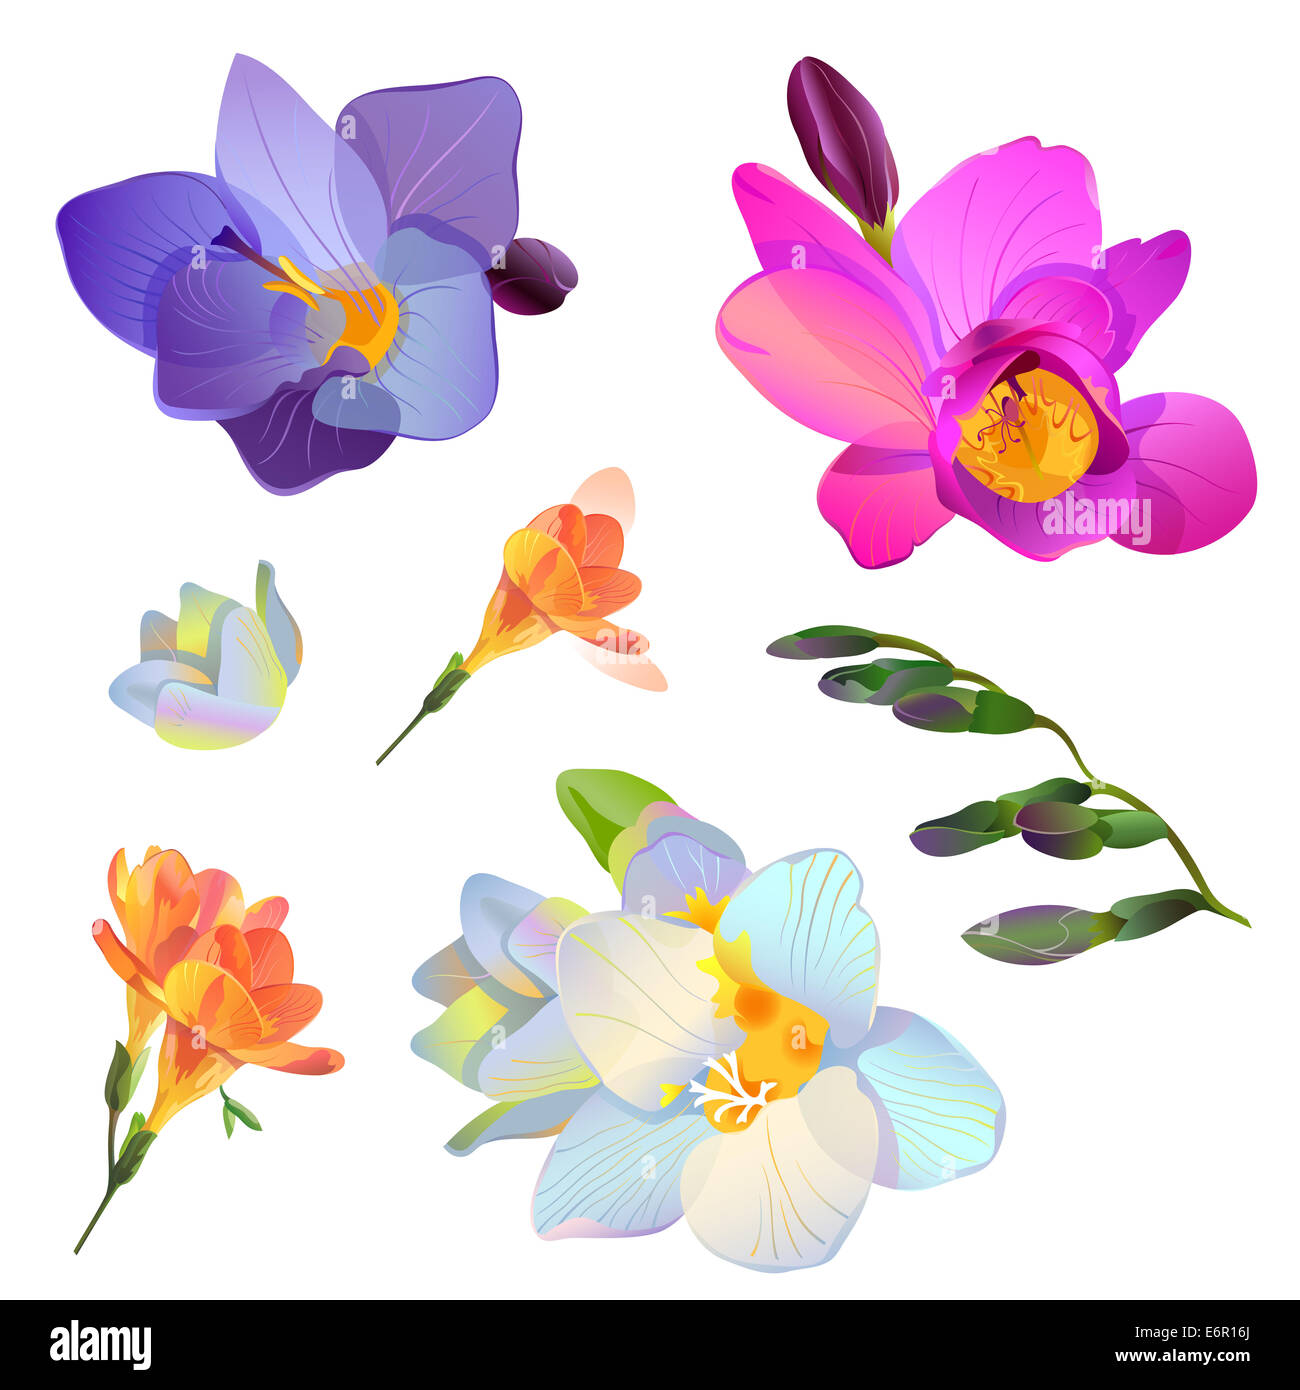 Isolated pink, white and blue freesia flowers and branches for your design Stock Photo